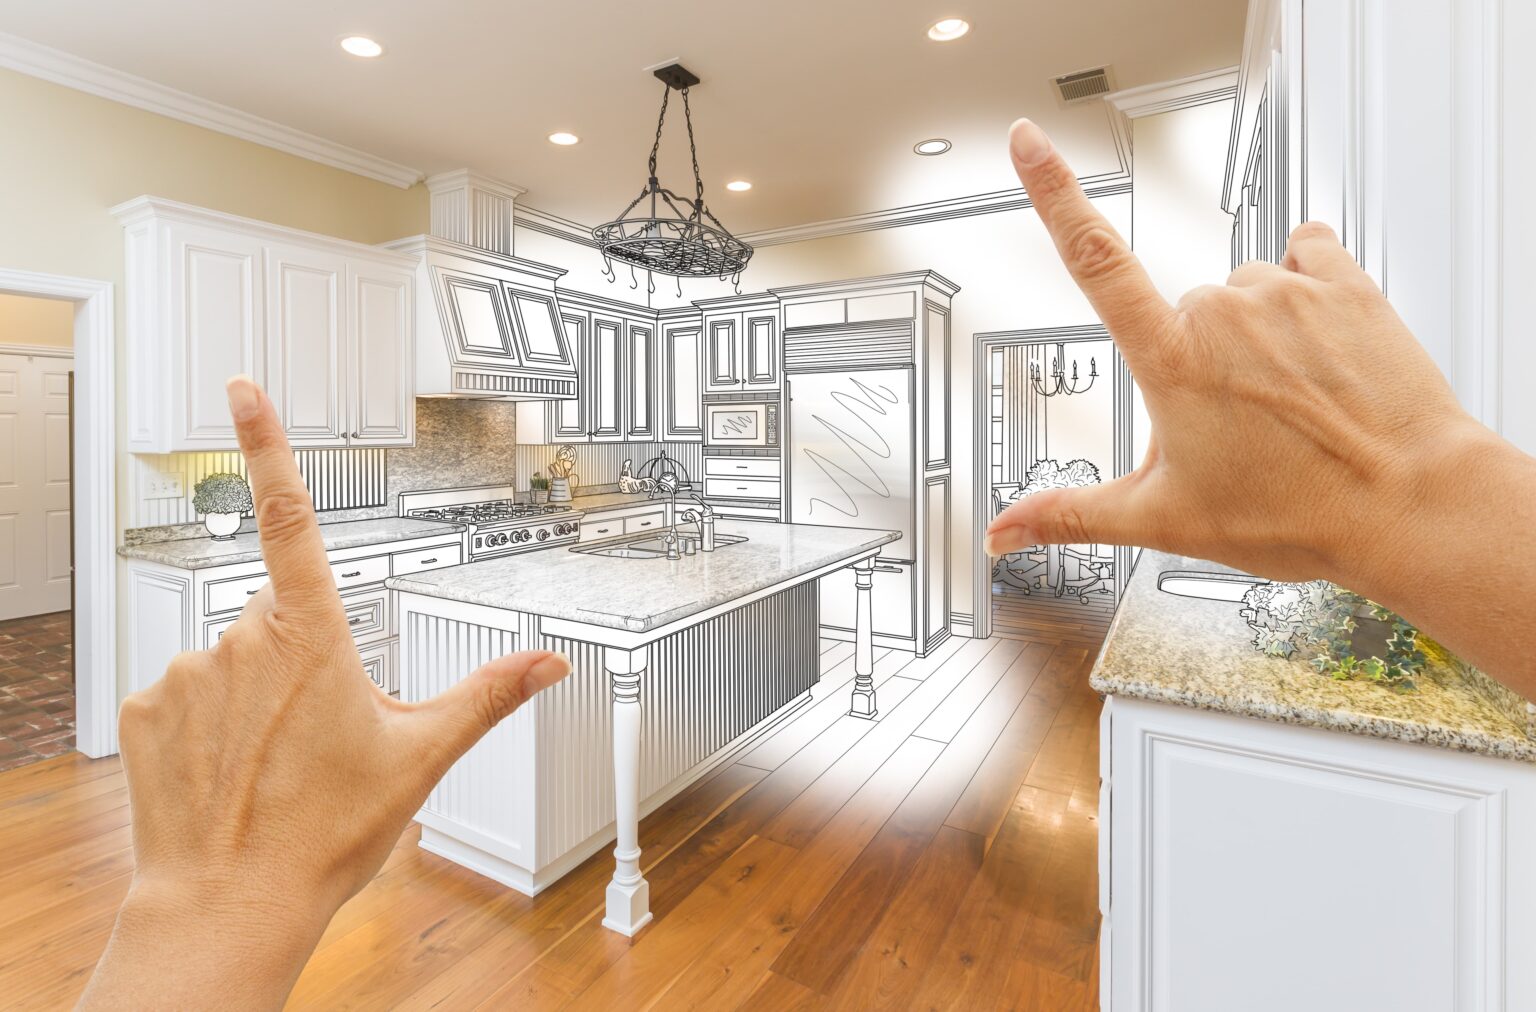 KITCHEN REMODELING: HOW TO PLAN AND EXECUTE A KITCHEN REMODEL